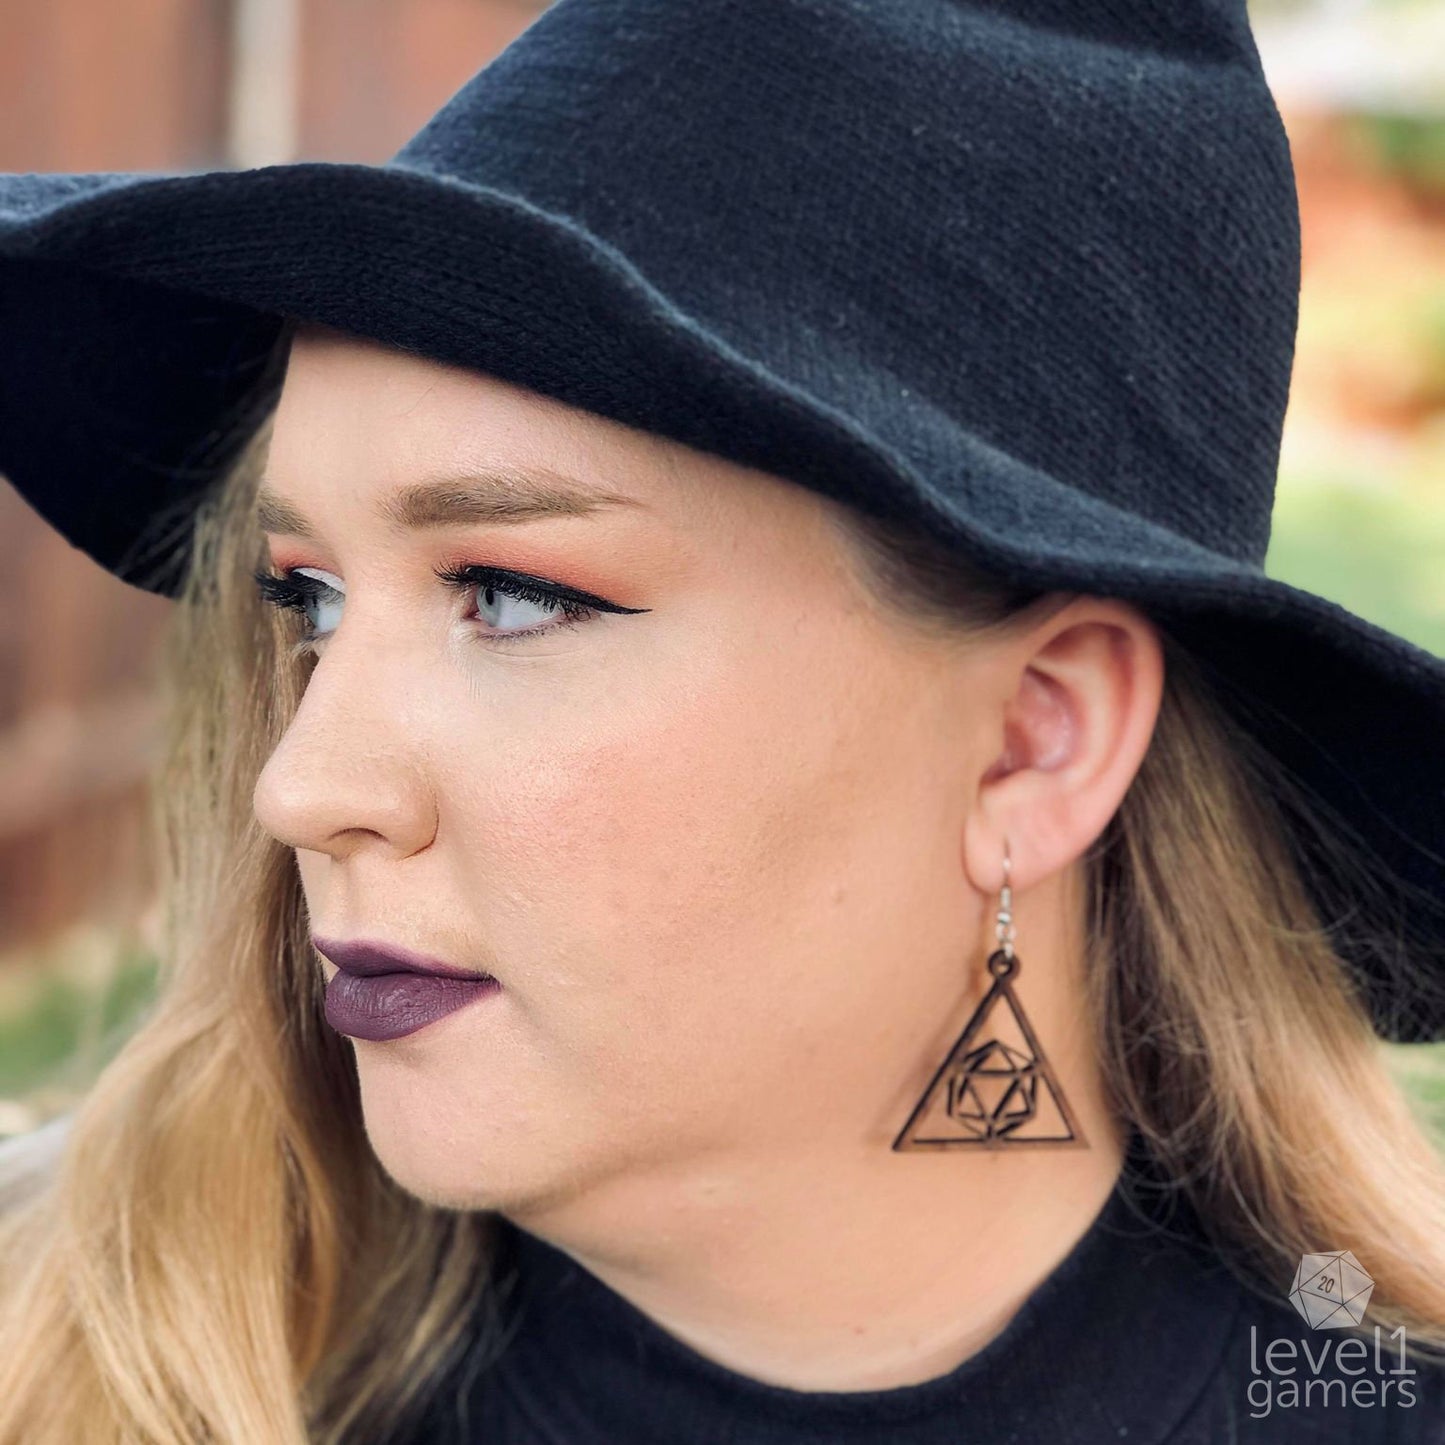 D20 Triangle Earrings  Level 1 Gamers   